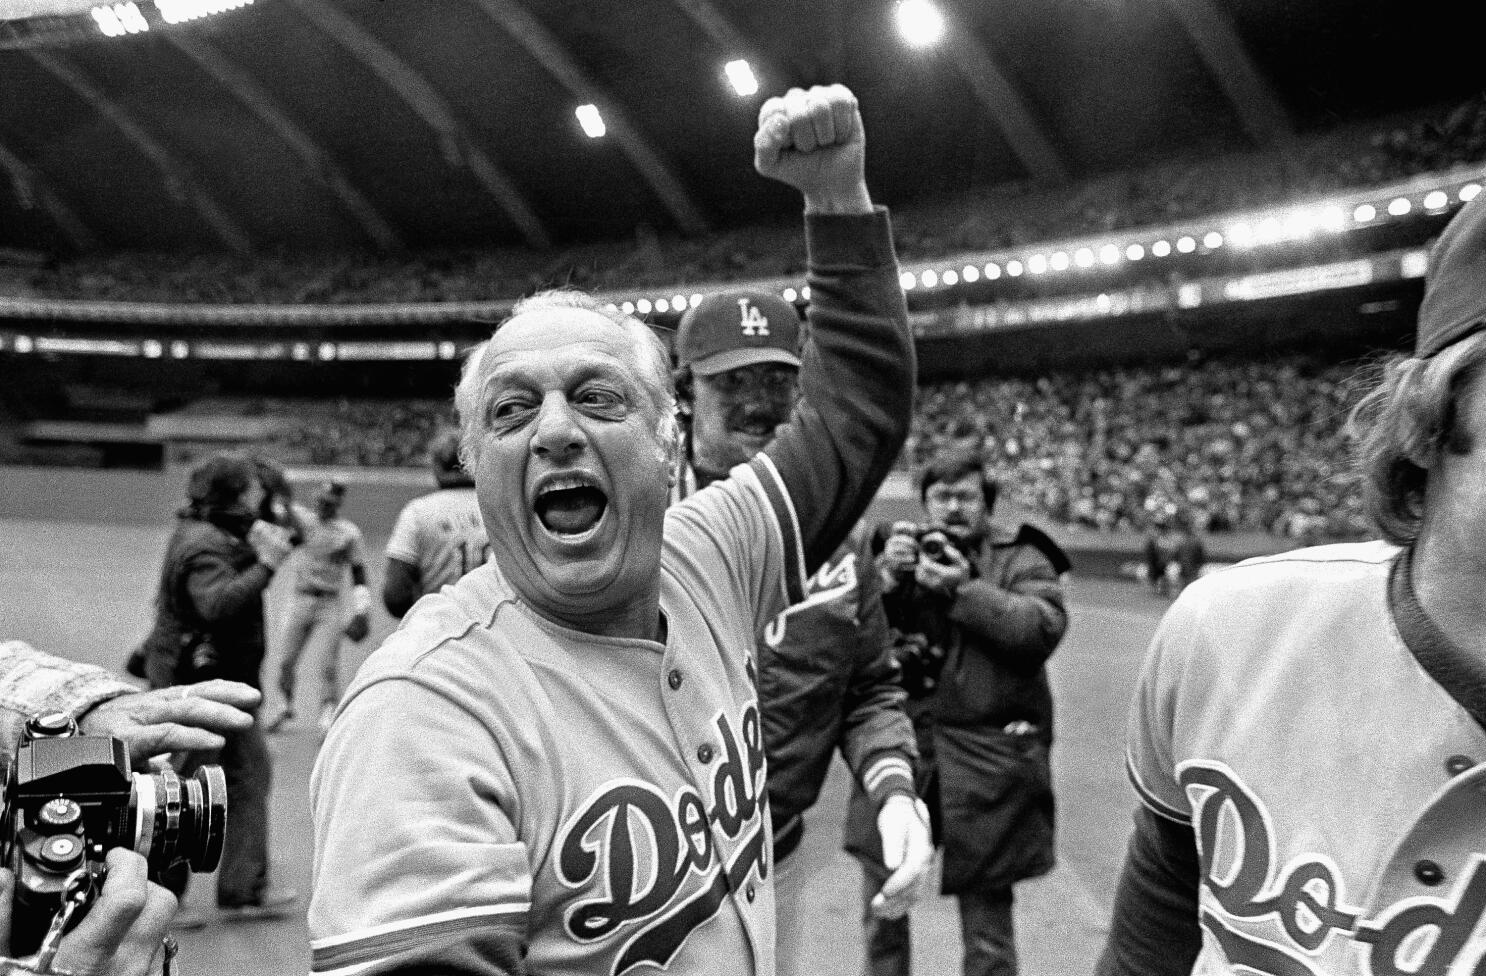 Tommy Lasorda, legendary Los Angeles Dodgers manager, has